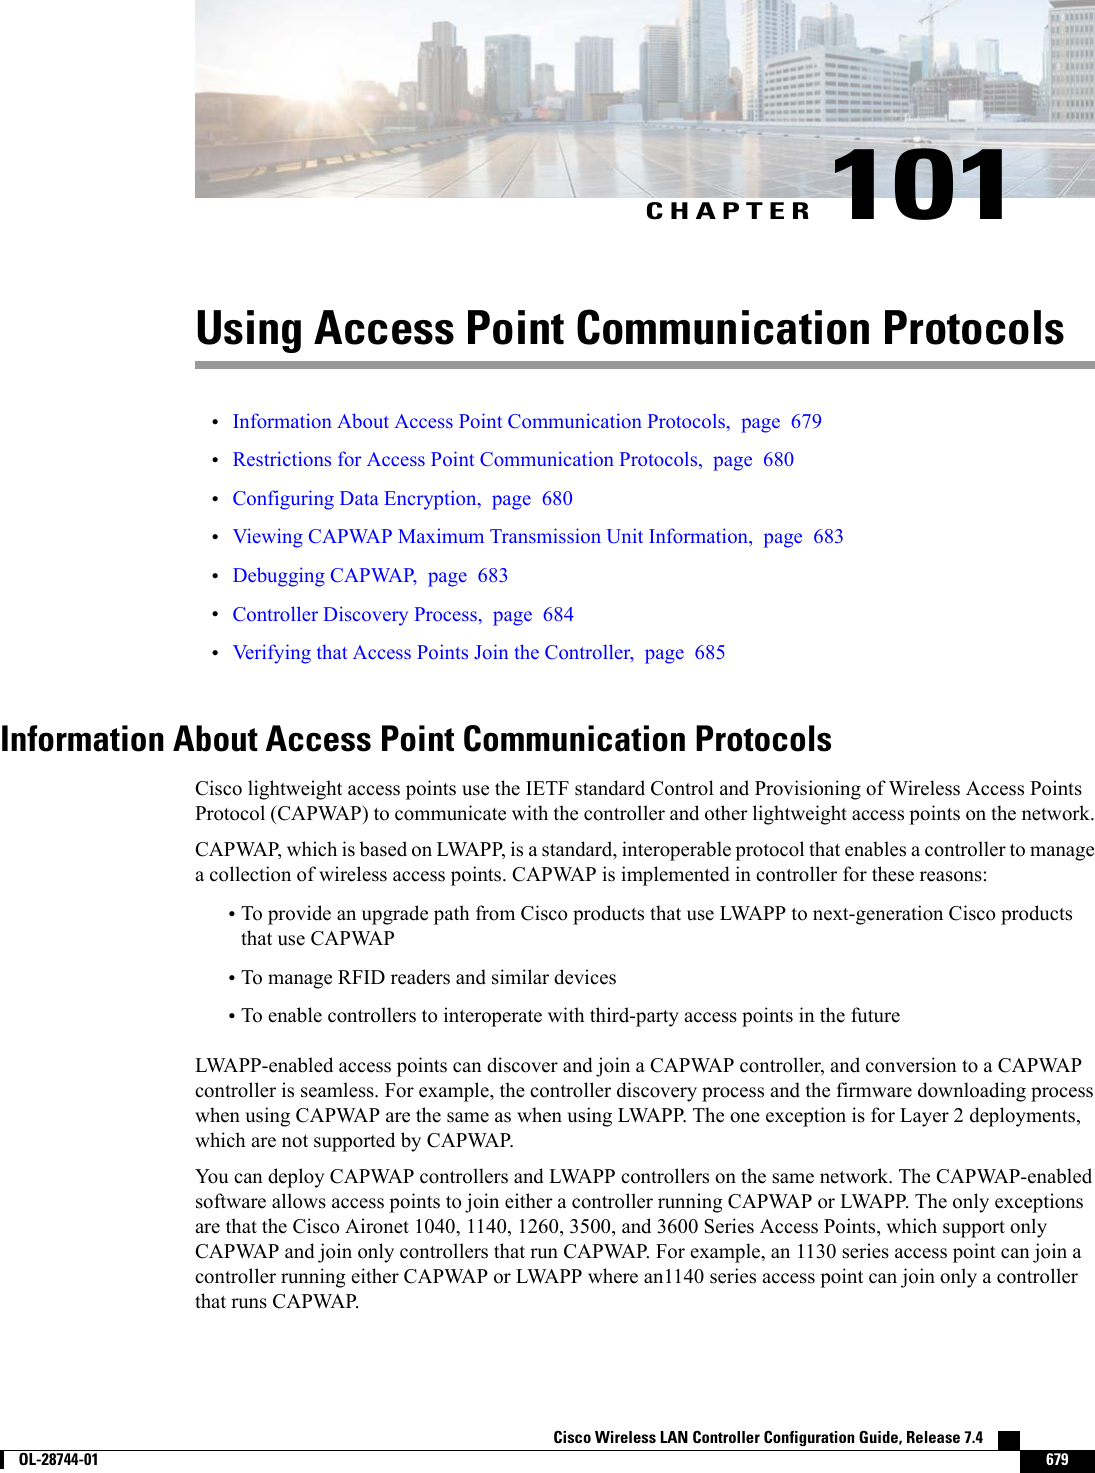 CHAPTER 101Using Access Point Communication Protocols•Information About Access Point Communication Protocols, page 679•Restrictions for Access Point Communication Protocols, page 680•Configuring Data Encryption, page 680•Viewing CAPWAP Maximum Transmission Unit Information, page 683•Debugging CAPWAP, page 683•Controller Discovery Process, page 684•Verifying that Access Points Join the Controller, page 685Information About Access Point Communication ProtocolsCisco lightweight access points use the IETF standard Control and Provisioning of Wireless Access PointsProtocol (CAPWAP) to communicate with the controller and other lightweight access points on the network.CAPWAP, which is based on LWAPP, is a standard, interoperable protocol that enables a controller to managea collection of wireless access points. CAPWAP is implemented in controller for these reasons:•To provide an upgrade path from Cisco products that use LWAPP to next-generation Cisco productsthat use CAPWAP•To manage RFID readers and similar devices•To enable controllers to interoperate with third-party access points in the futureLWAPP-enabled access points can discover and join a CAPWAP controller, and conversion to a CAPWAPcontroller is seamless. For example, the controller discovery process and the firmware downloading processwhen using CAPWAP are the same as when using LWAPP. The one exception is for Layer 2 deployments,which are not supported by CAPWAP.You can deploy CAPWAP controllers and LWAPP controllers on the same network. The CAPWAP-enabledsoftware allows access points to join either a controller running CAPWAP or LWAPP. The only exceptionsare that the Cisco Aironet 1040, 1140, 1260, 3500, and 3600 Series Access Points, which support onlyCAPWAP and join only controllers that run CAPWAP. For example, an 1130 series access point can join acontroller running either CAPWAP or LWAPP where an1140 series access point can join only a controllerthat runs CAPWAP.Cisco Wireless LAN Controller Configuration Guide, Release 7.4        OL-28744-01 679